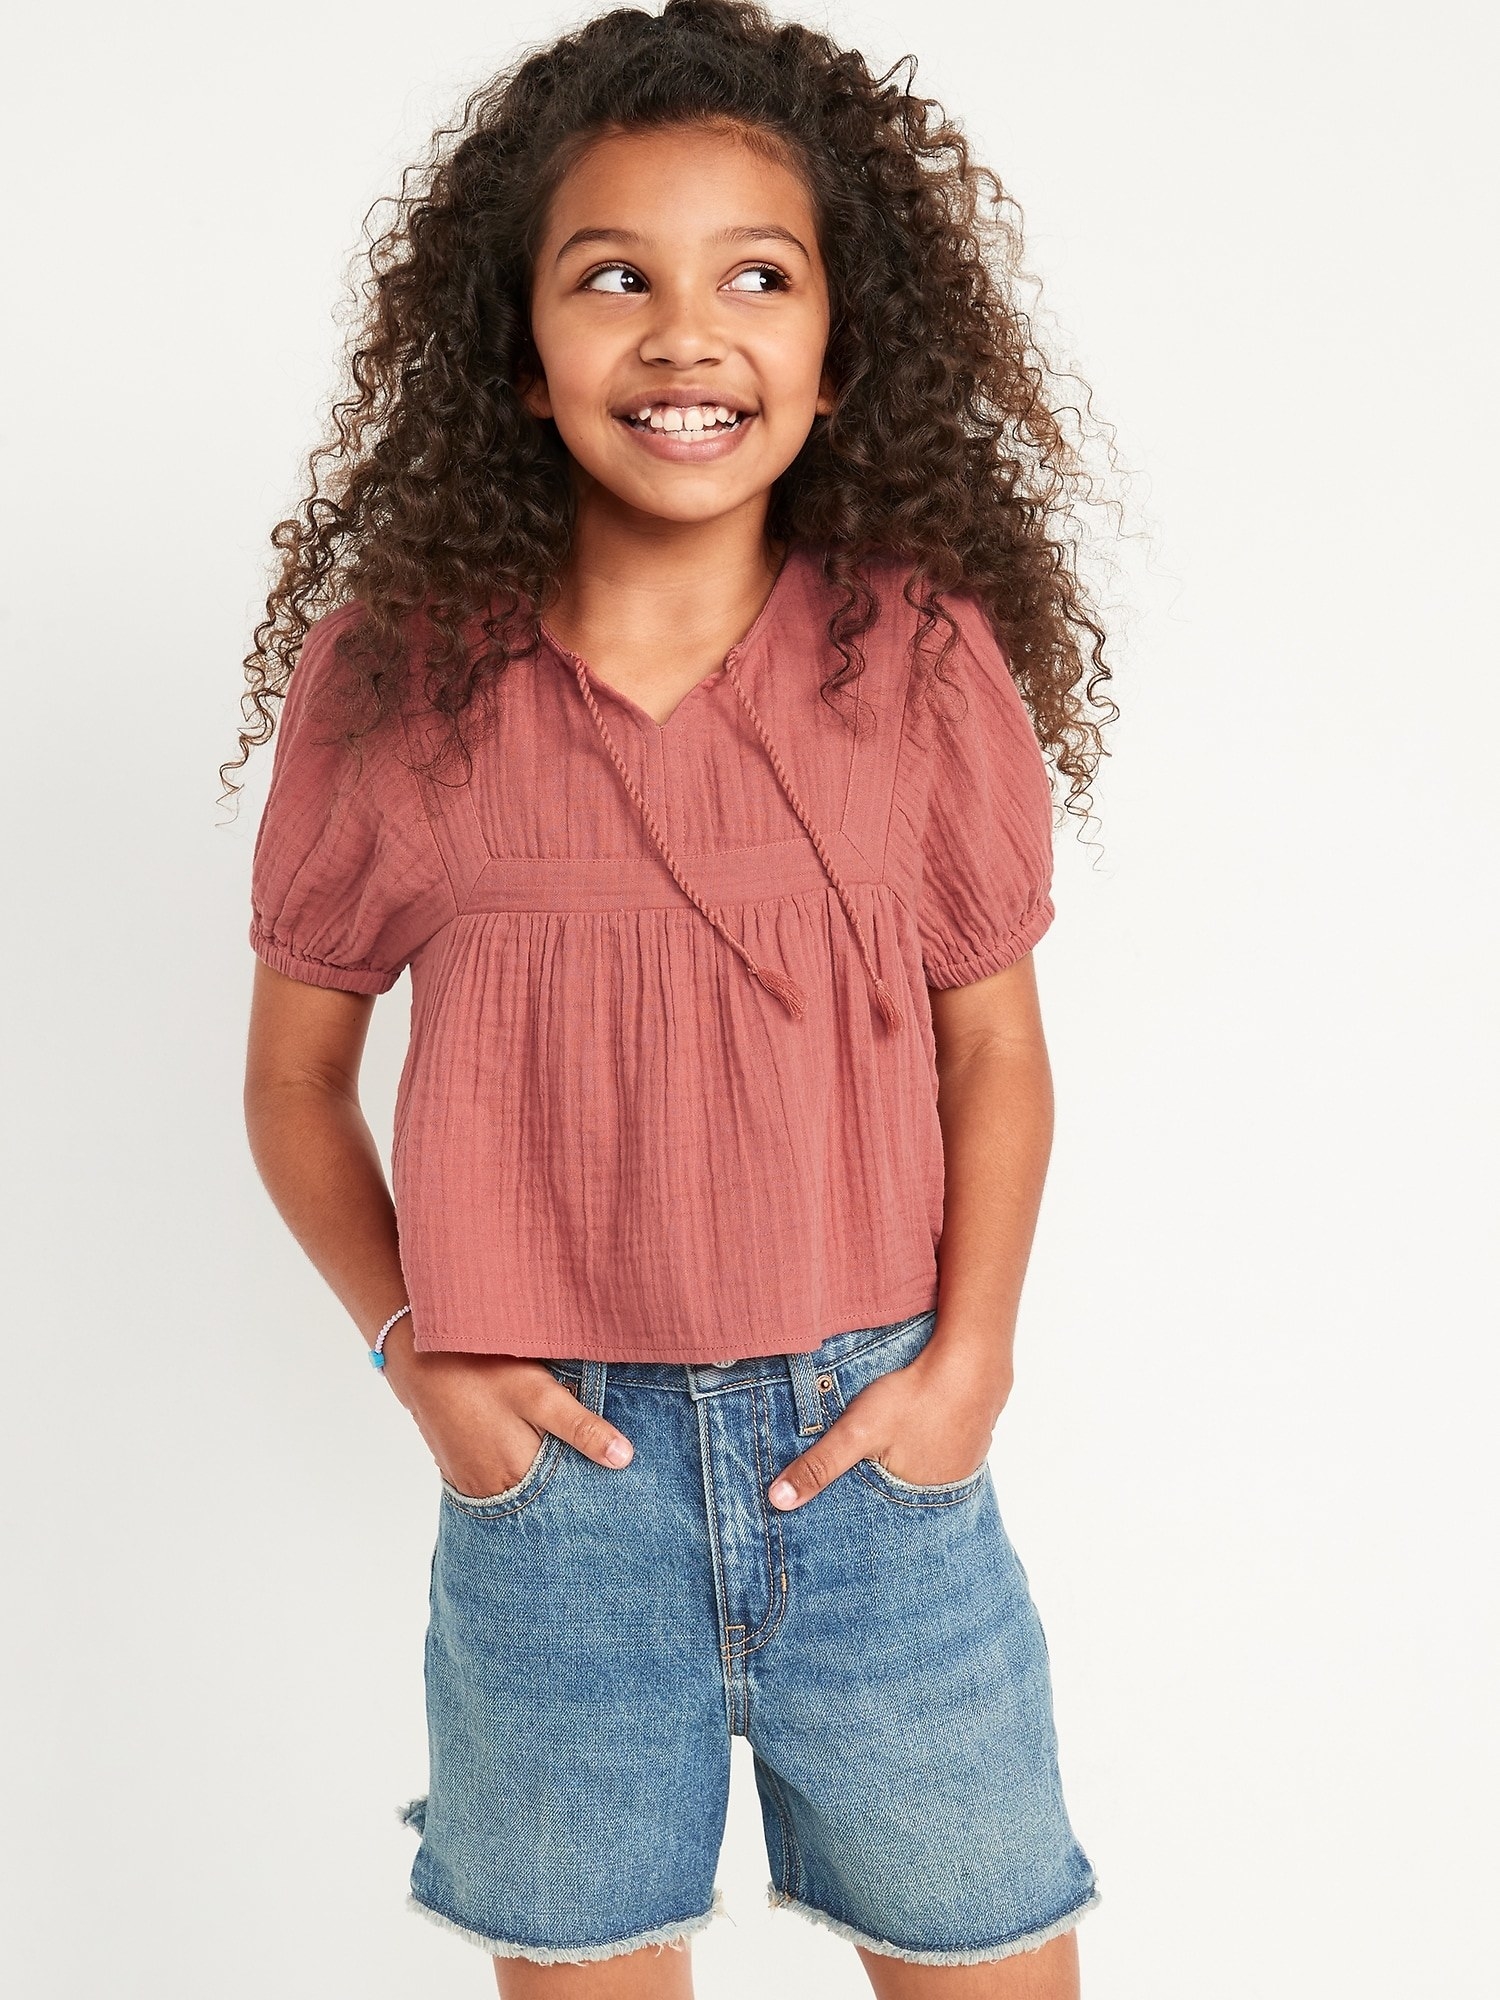 a child wearing the puff sleeve top in a clay color